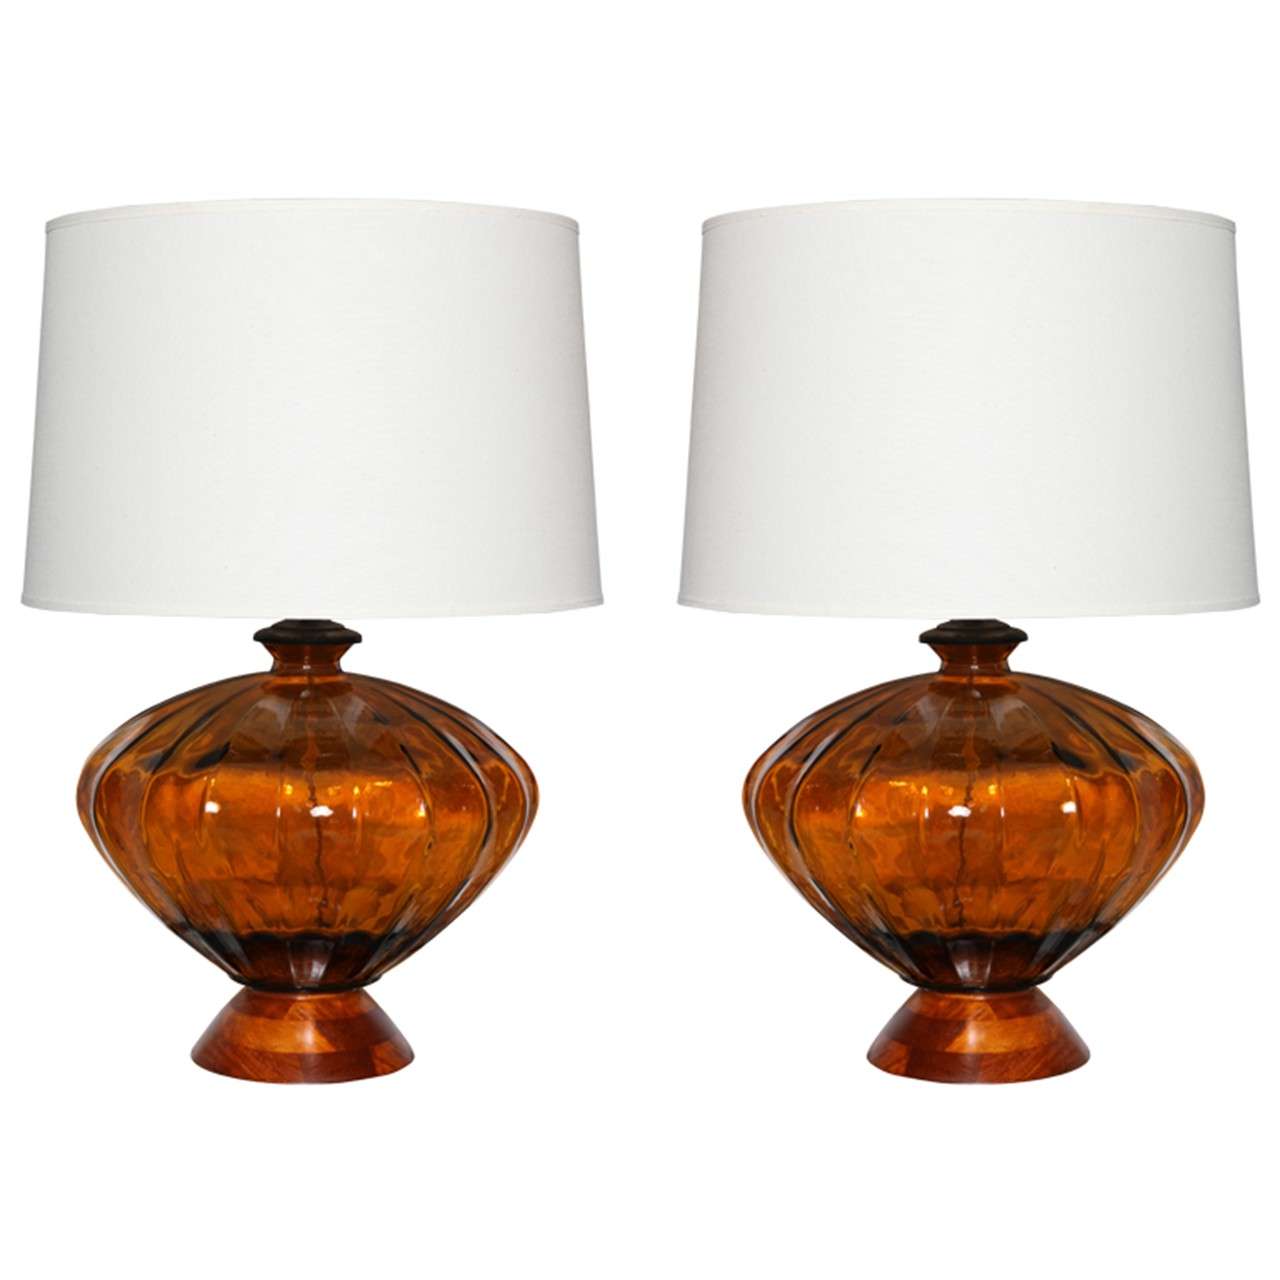 Pair of Monumental Amber Glass Table Lamps For Sale